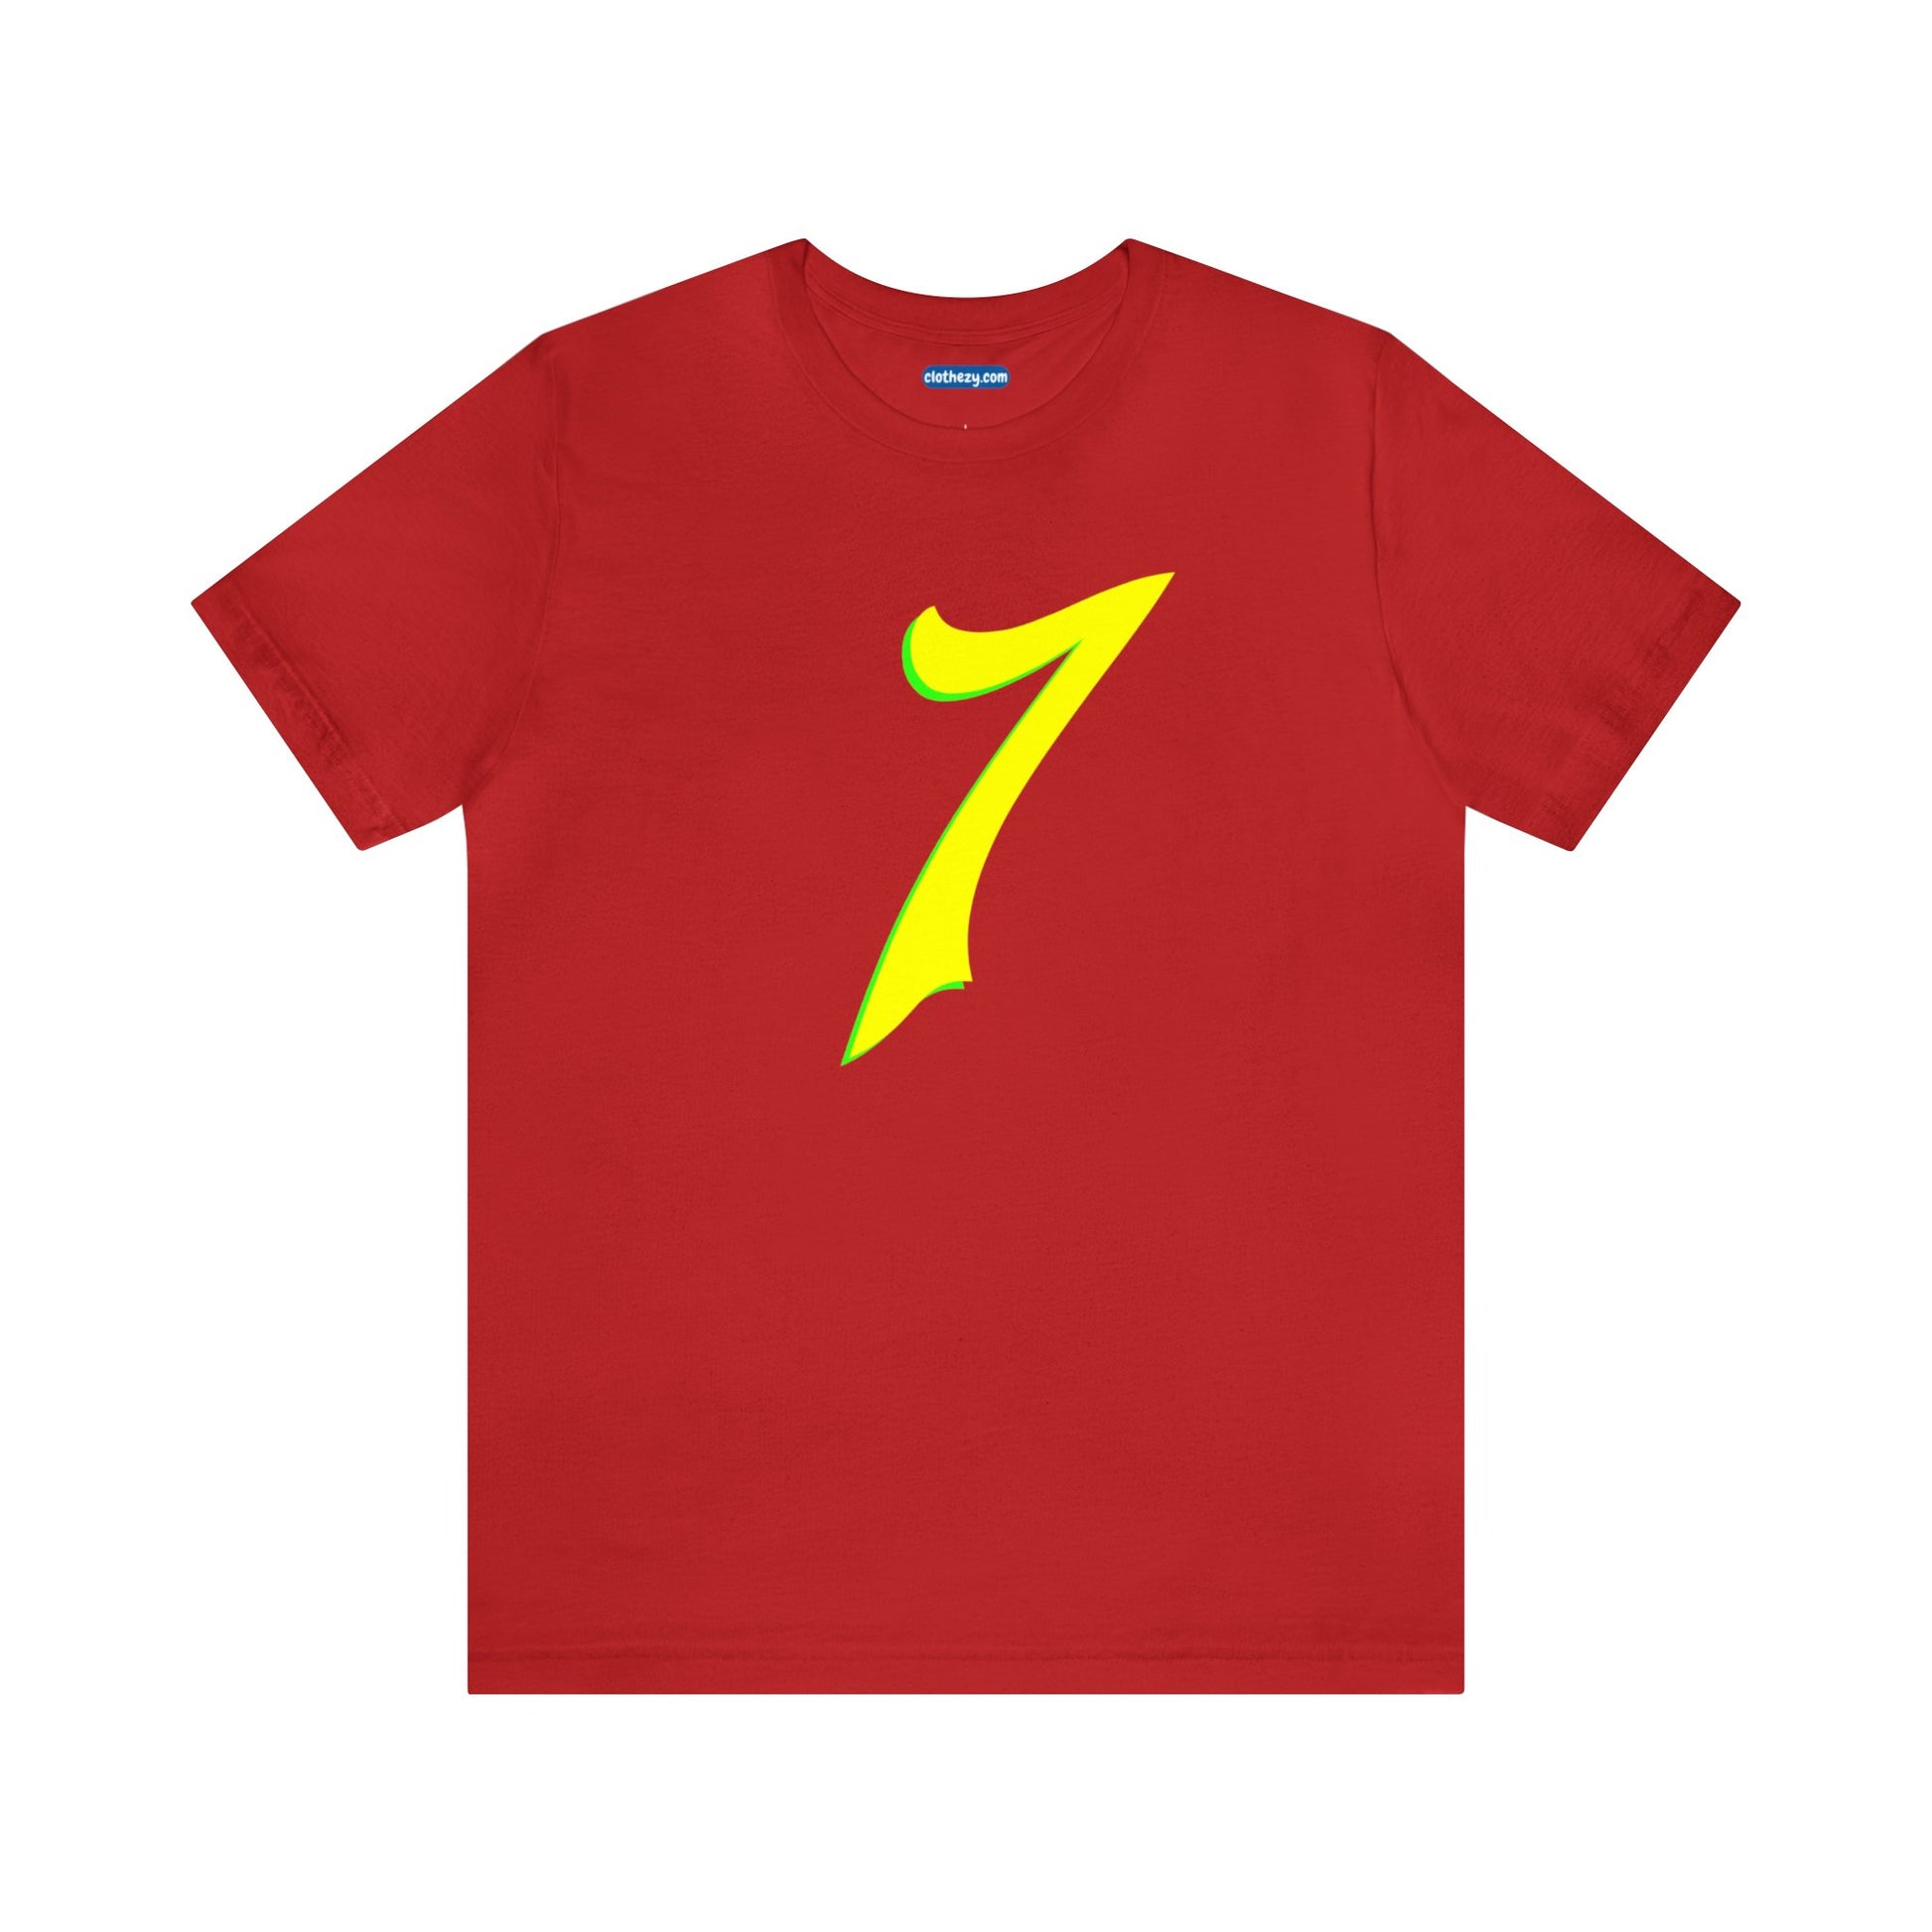 Number 7 Design - Soft Cotton Tee for birthdays and celebrations, Gift for friends and family, Multiple Options by clothezy.com in Red Size Small - Buy Now